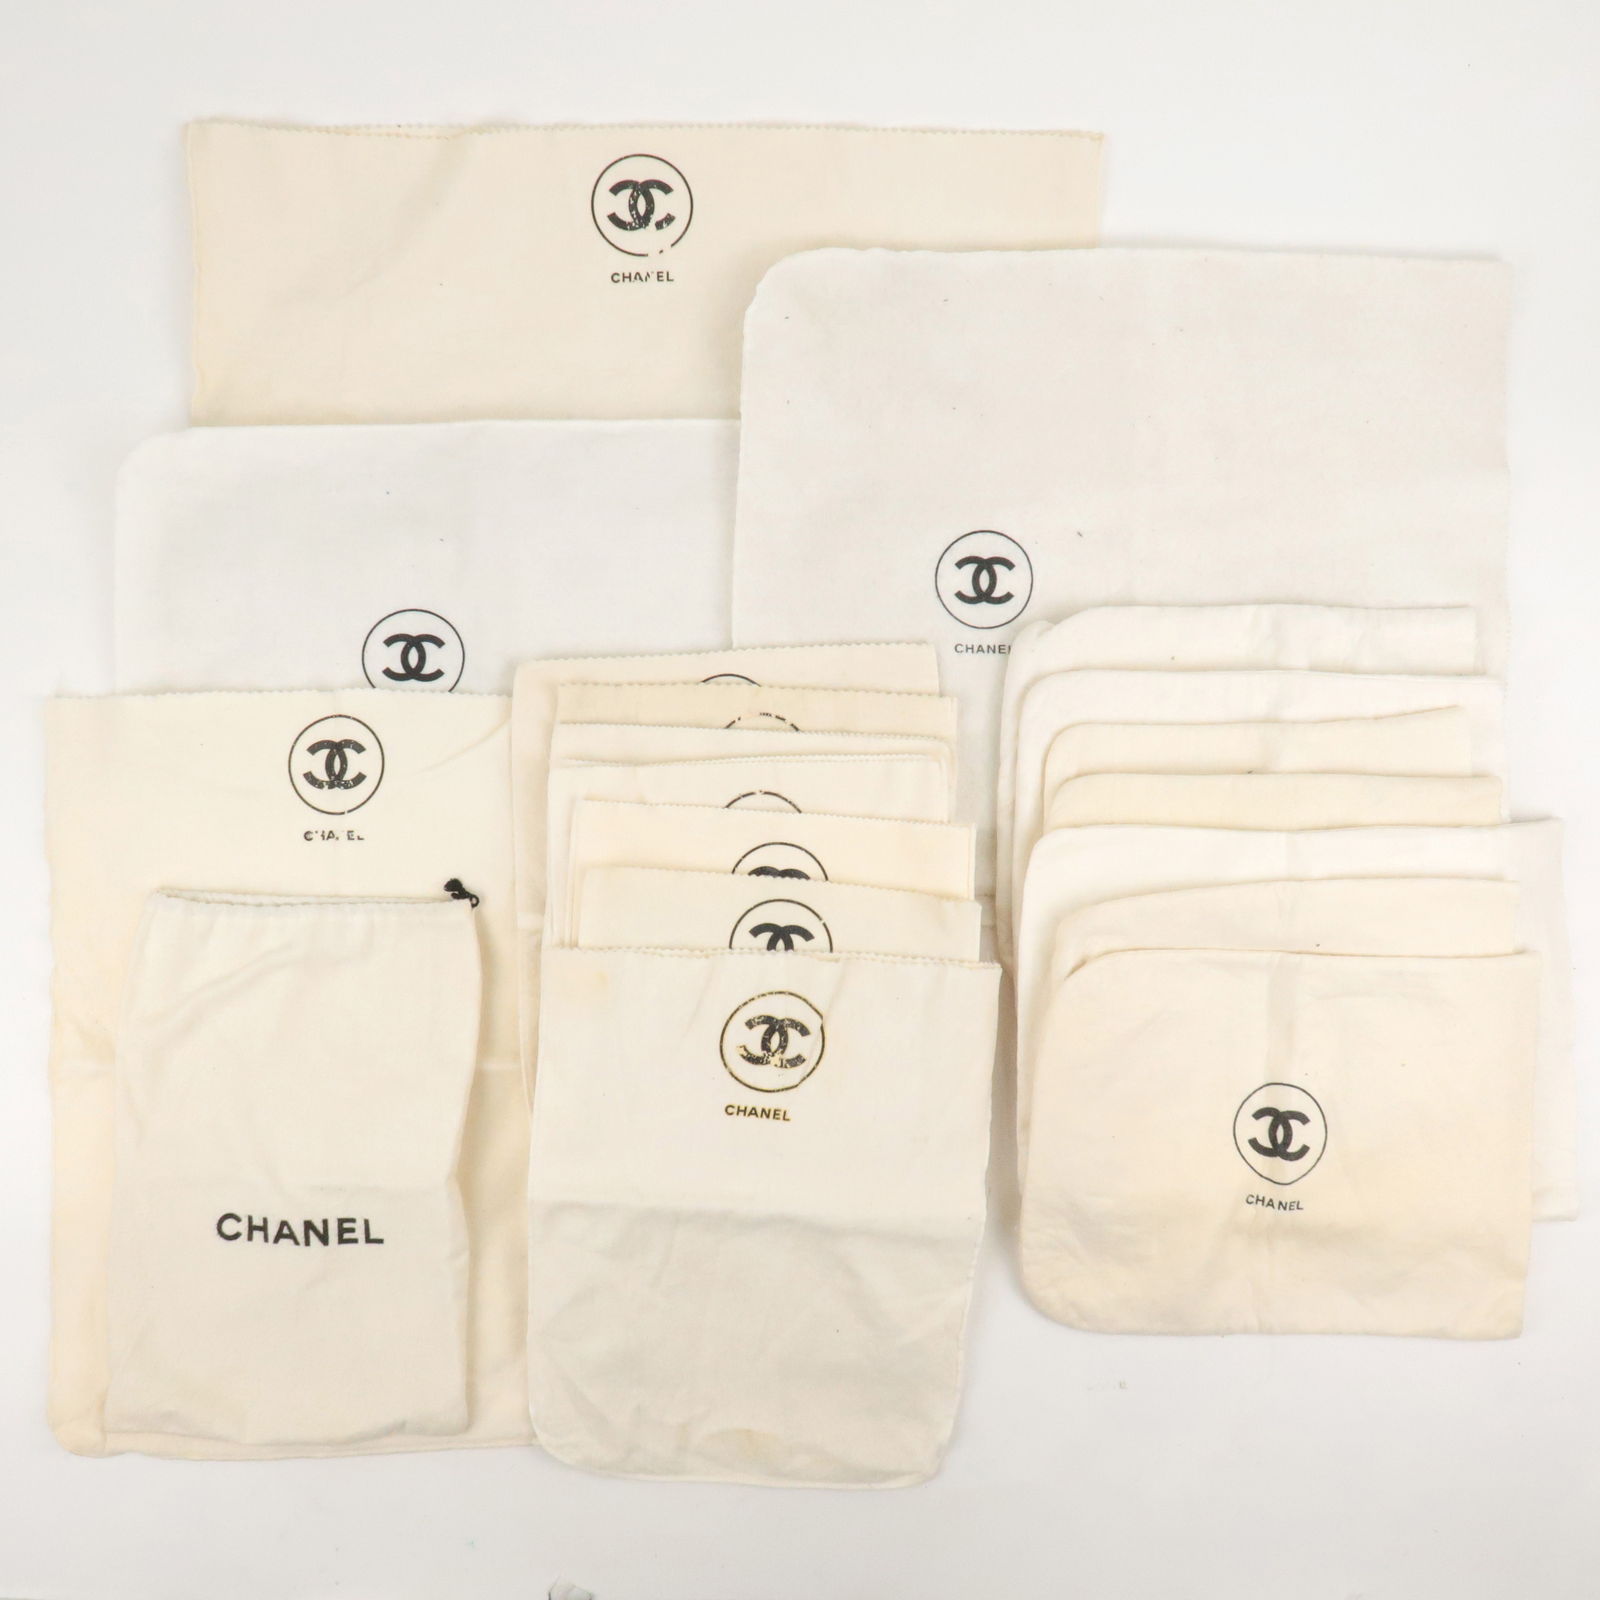 Dust bag and tag, Chanel Tote 393589